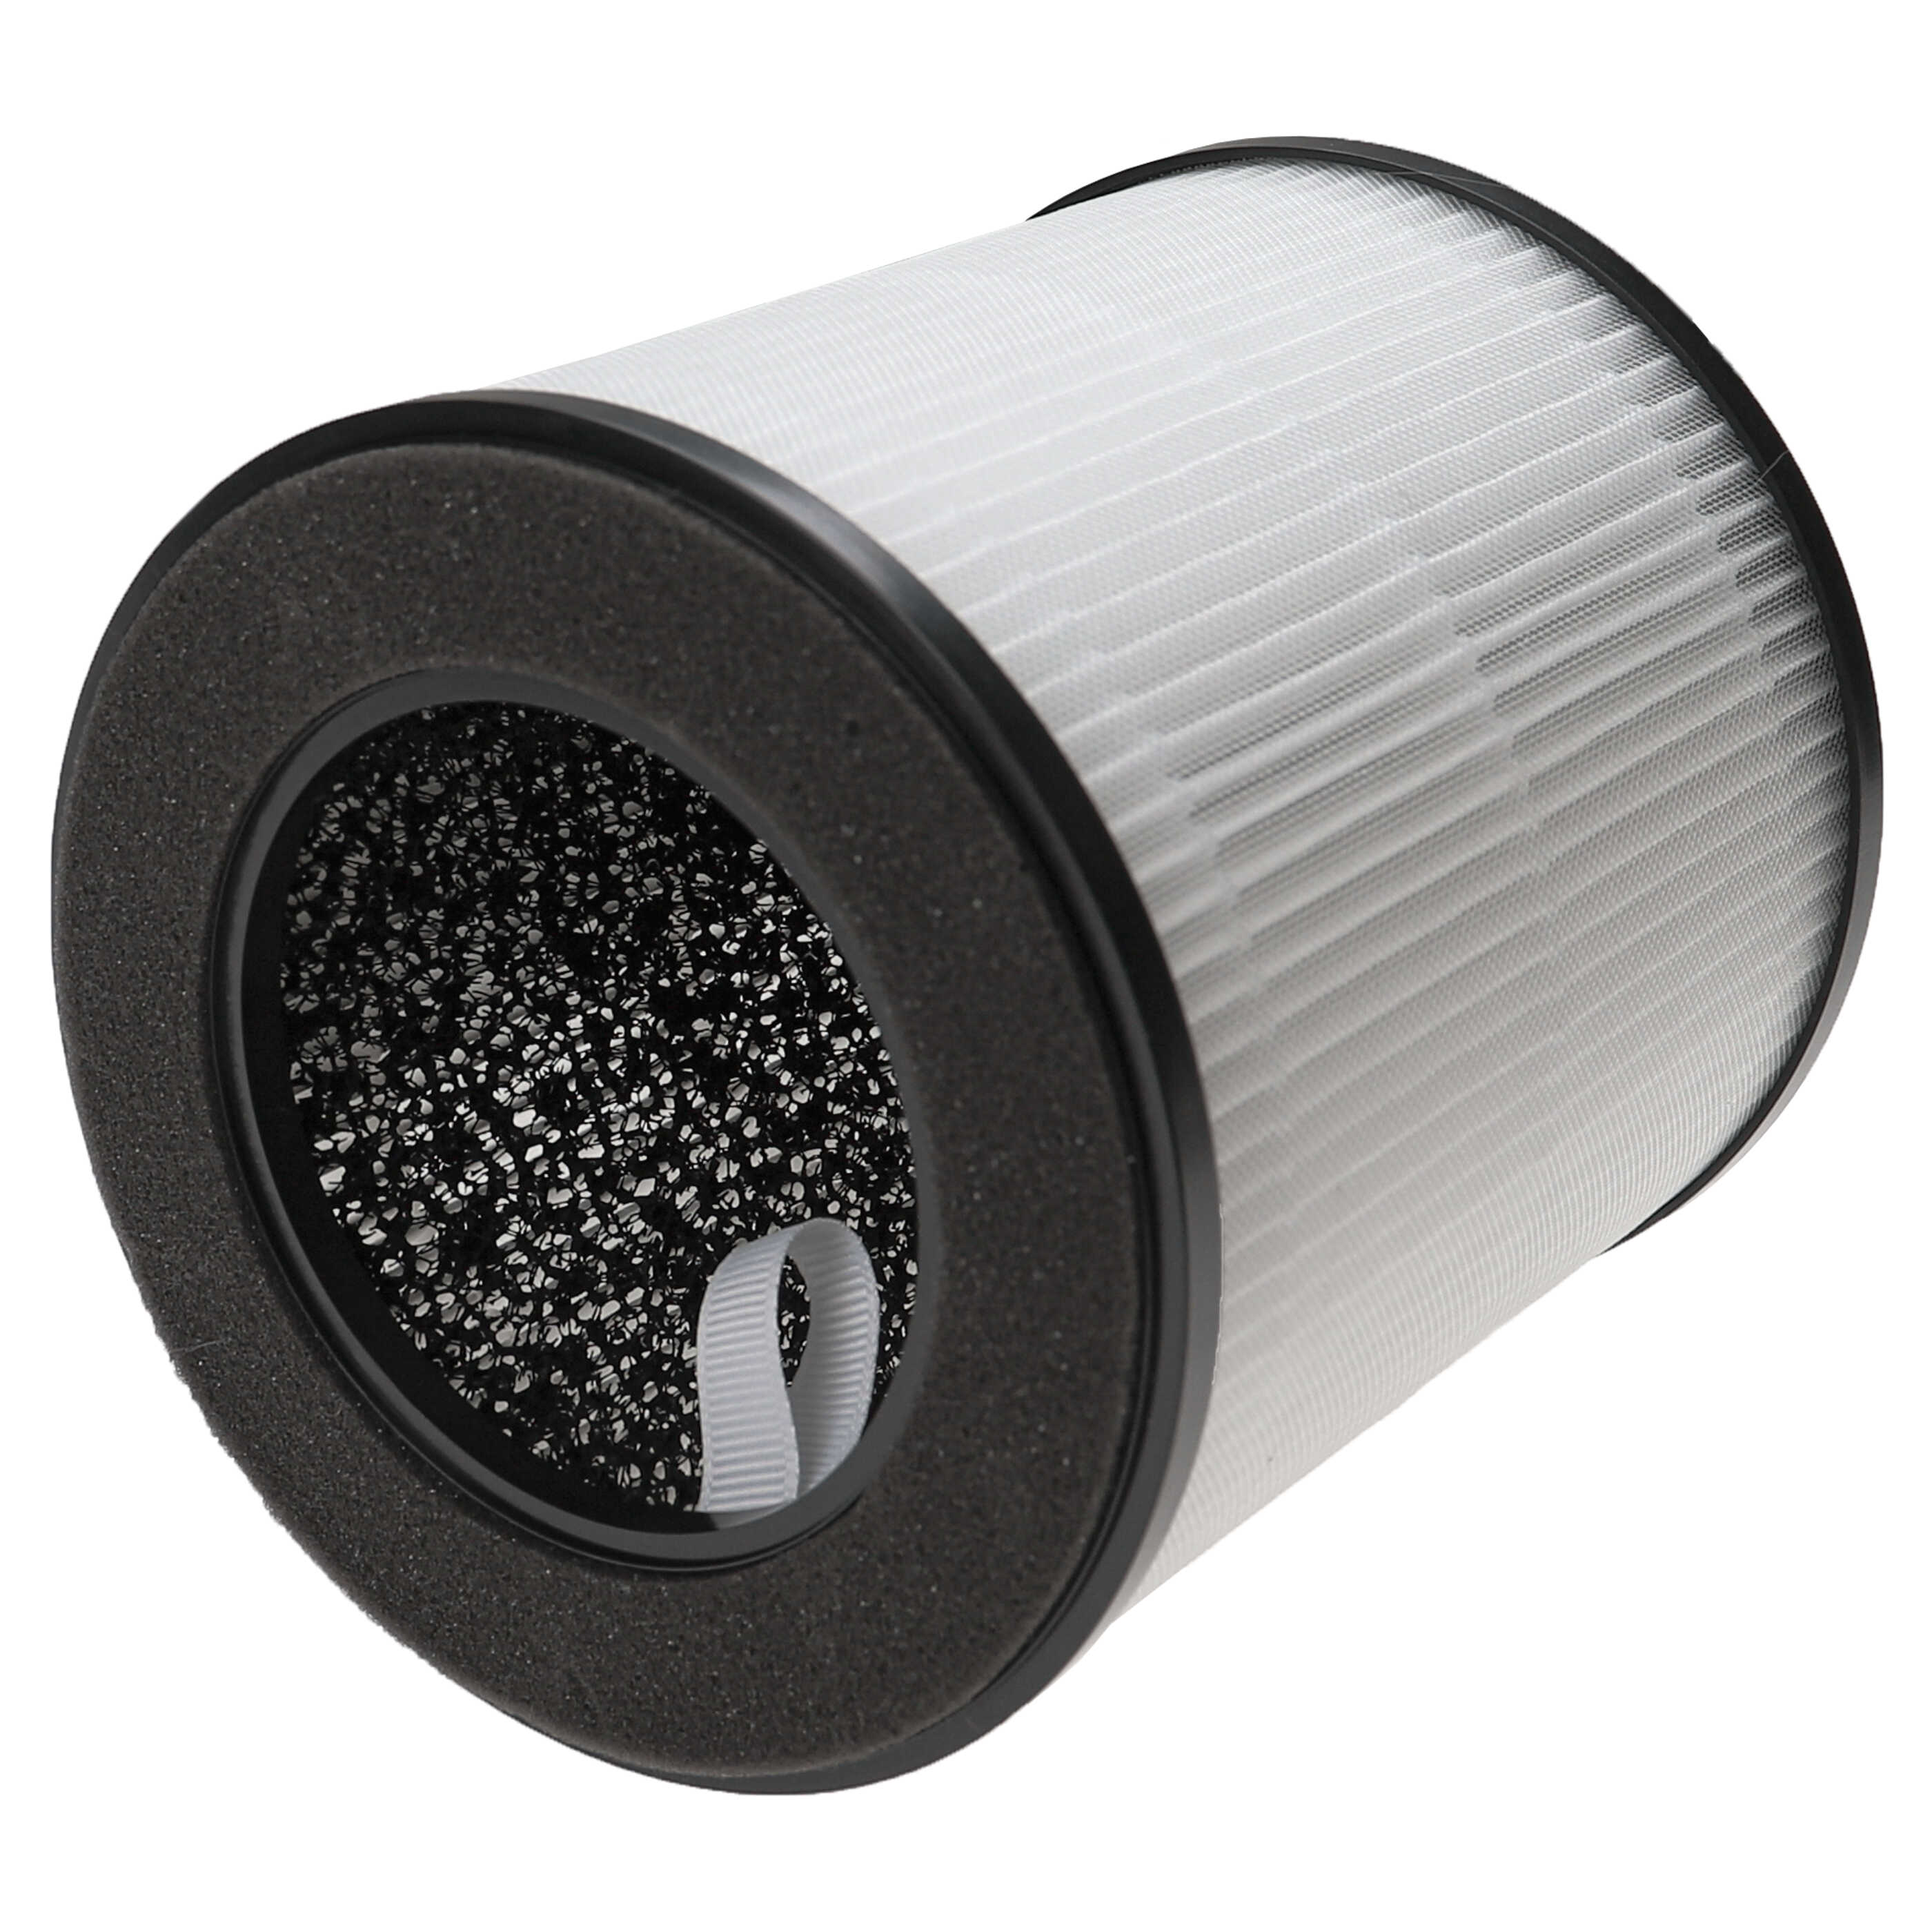 Filter for Acekool, DIKI, Nobebird B-D02F Air Purifier etc. - Pre Filter + HEPA + Activated Carbon